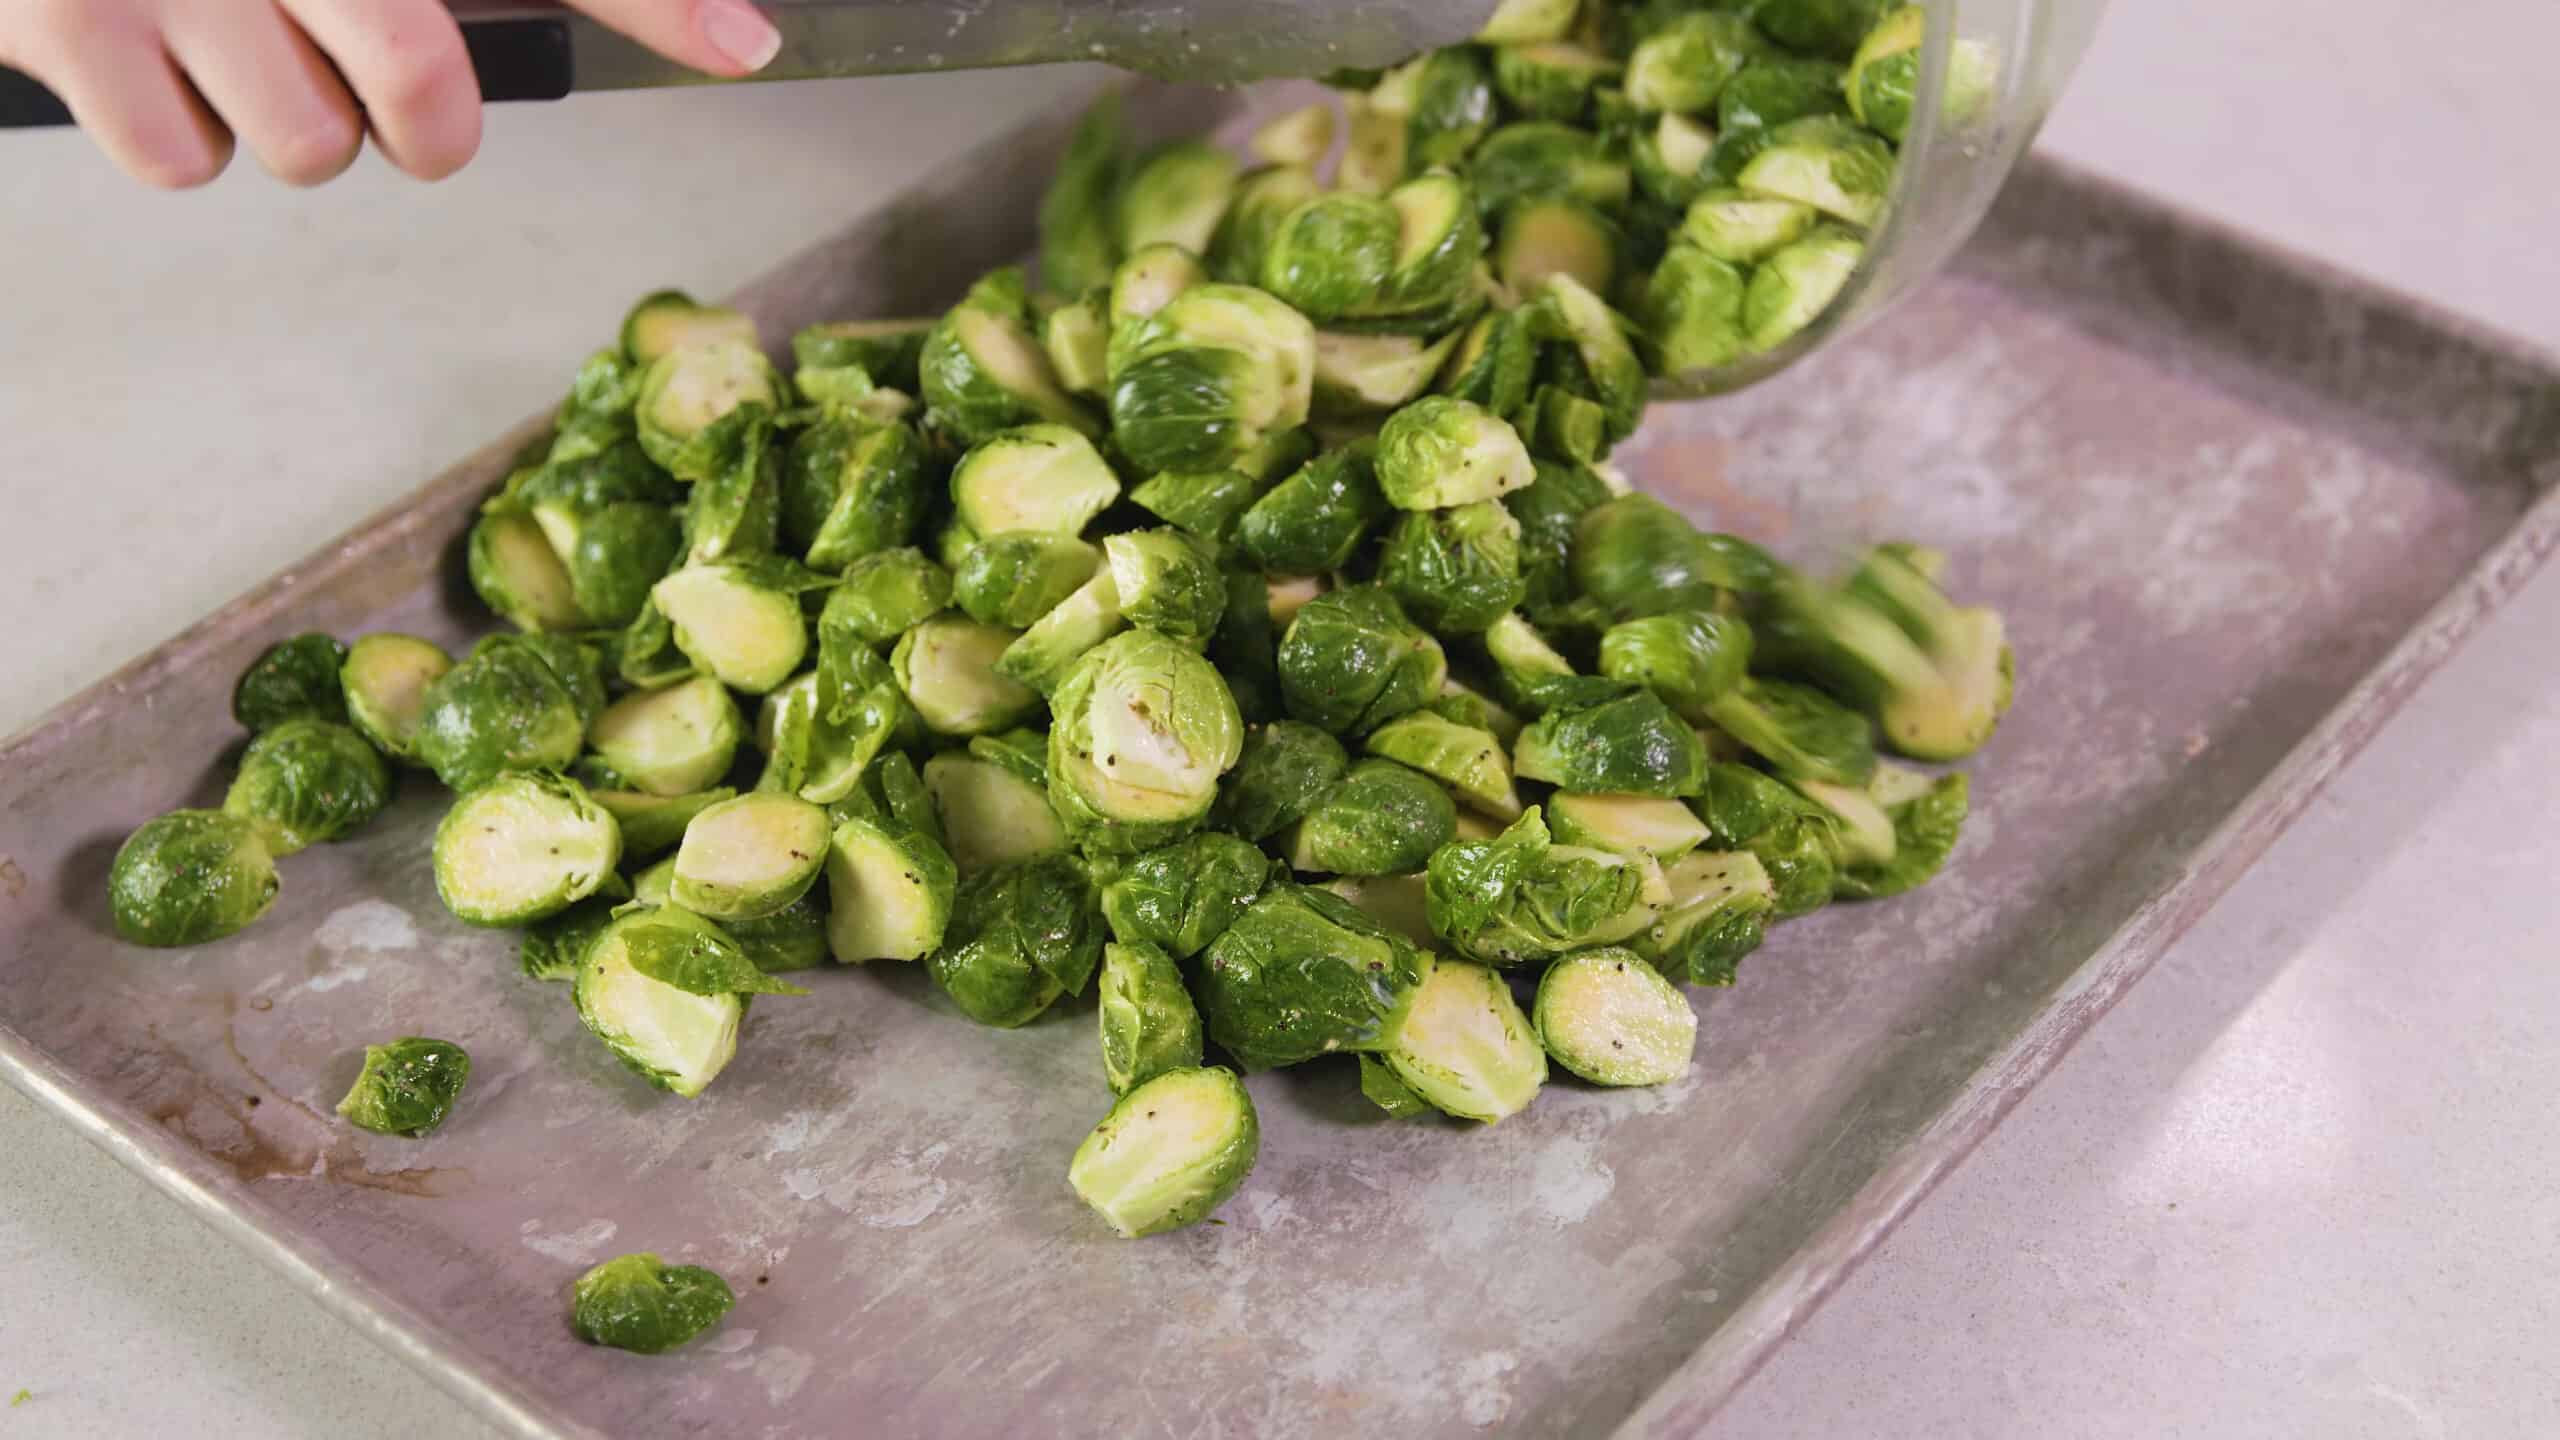 Angled view of aluminum baking sheet being filled with seasoned sliced garlic and halved Brussel sprouts being poured from a large clear glass mixing bowl.